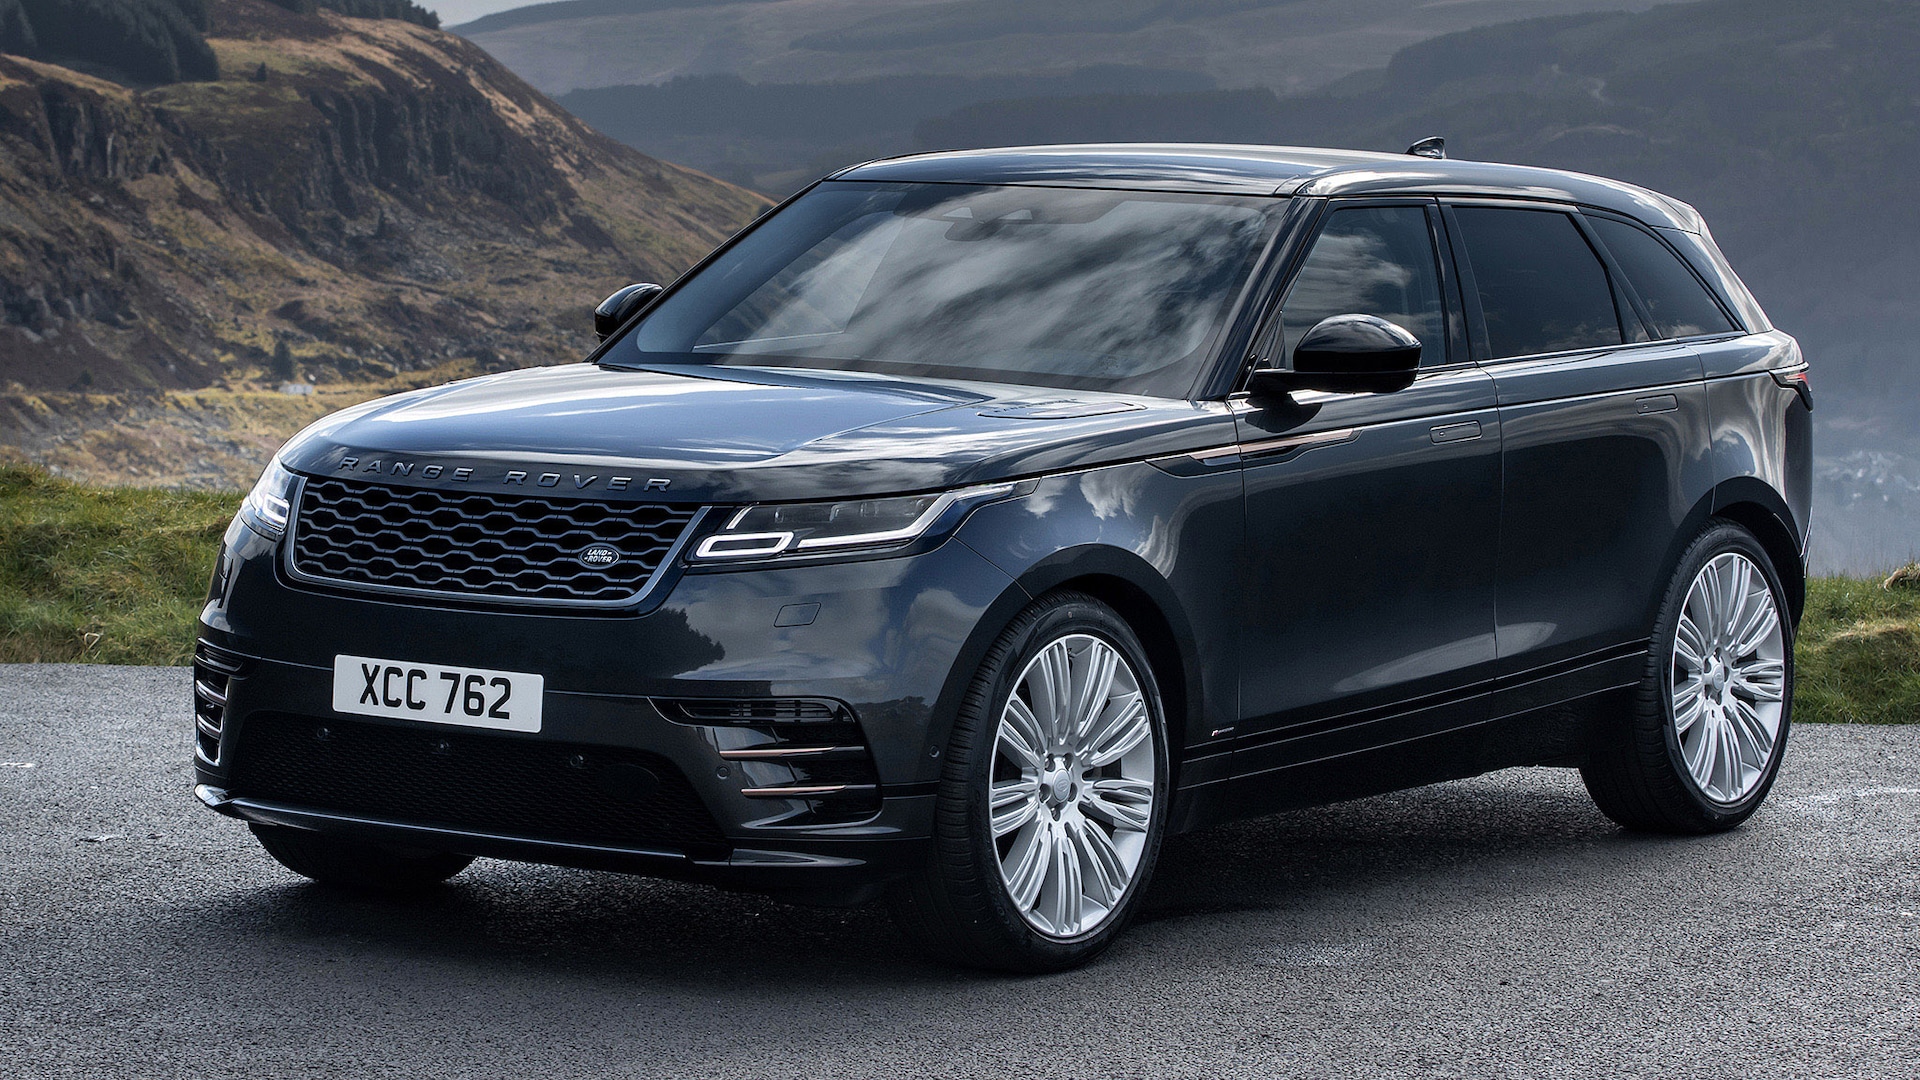 2022 Land Rover Range Rover Velar Prices, Reviews, and Photos - MotorTrend